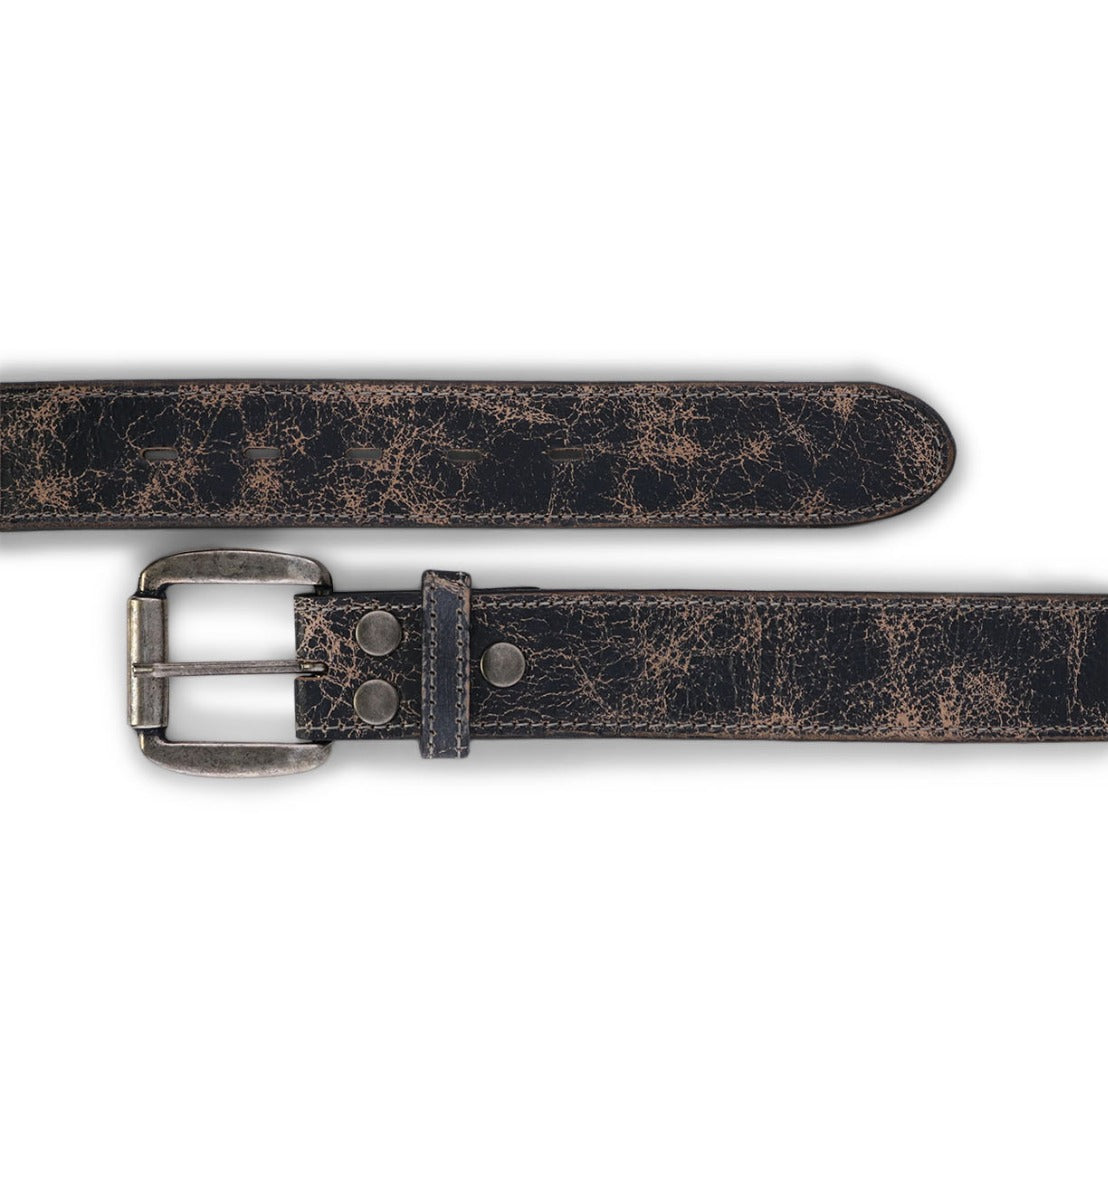 A weathered black leather Meander belt with an antique metal buckle, isolated on a white background by Bed Stu.